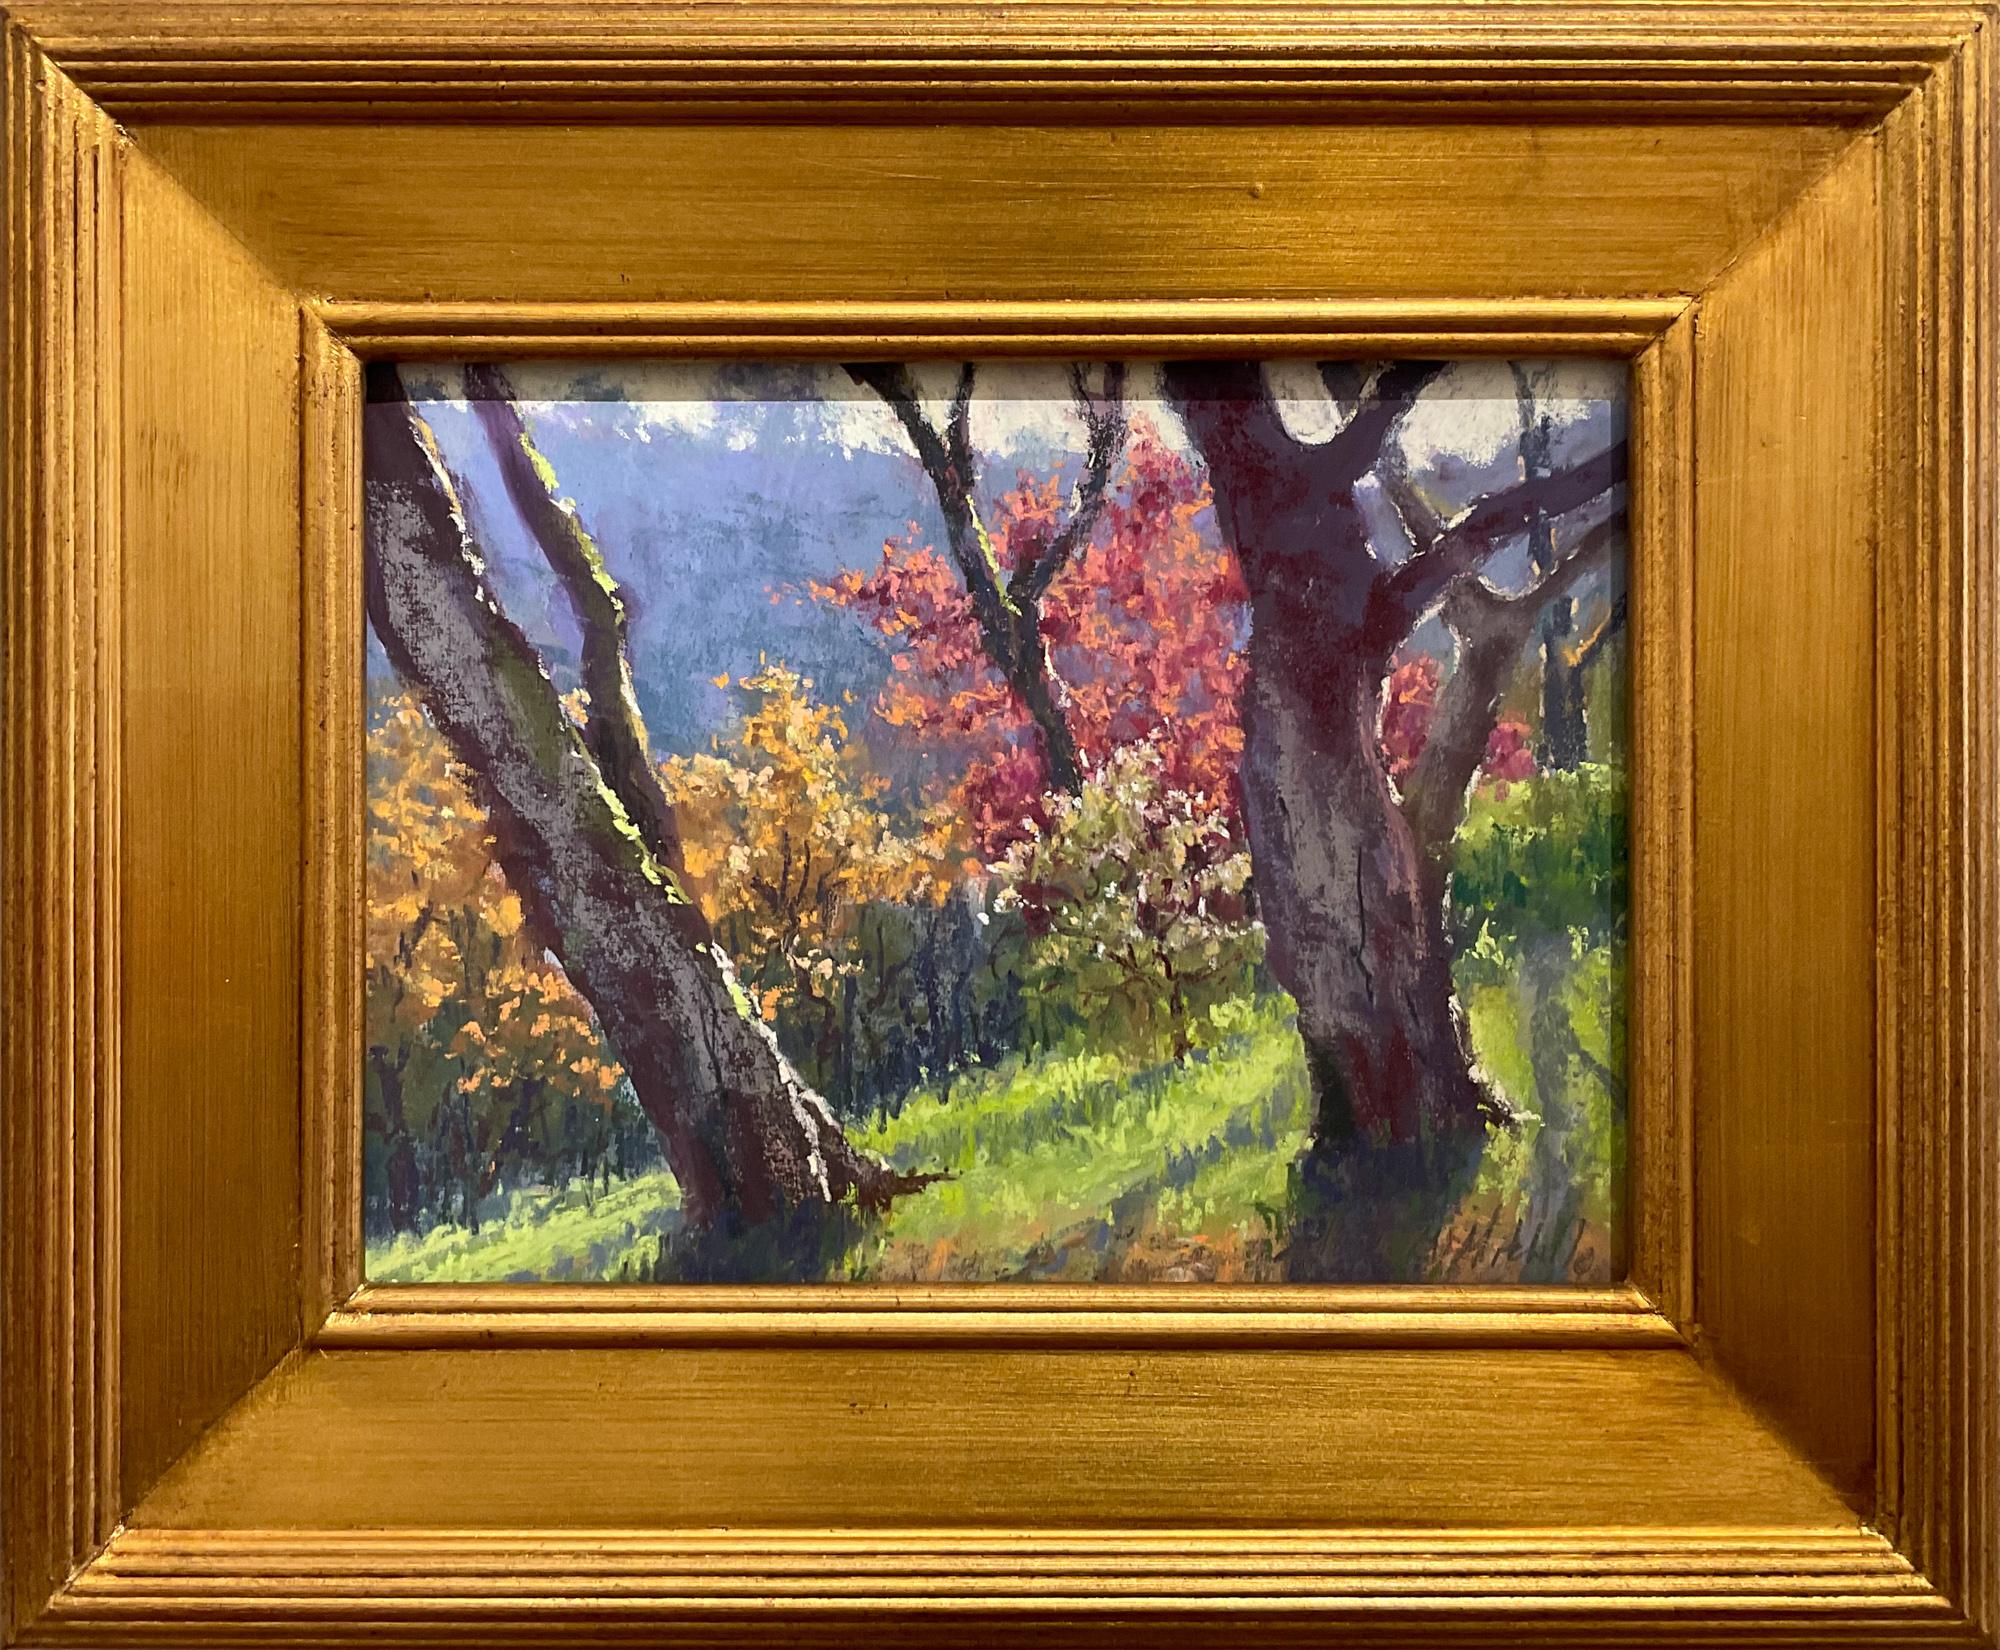 "Backlit Beauty" A sparkling landscape pastel painting by Clark Mitchell